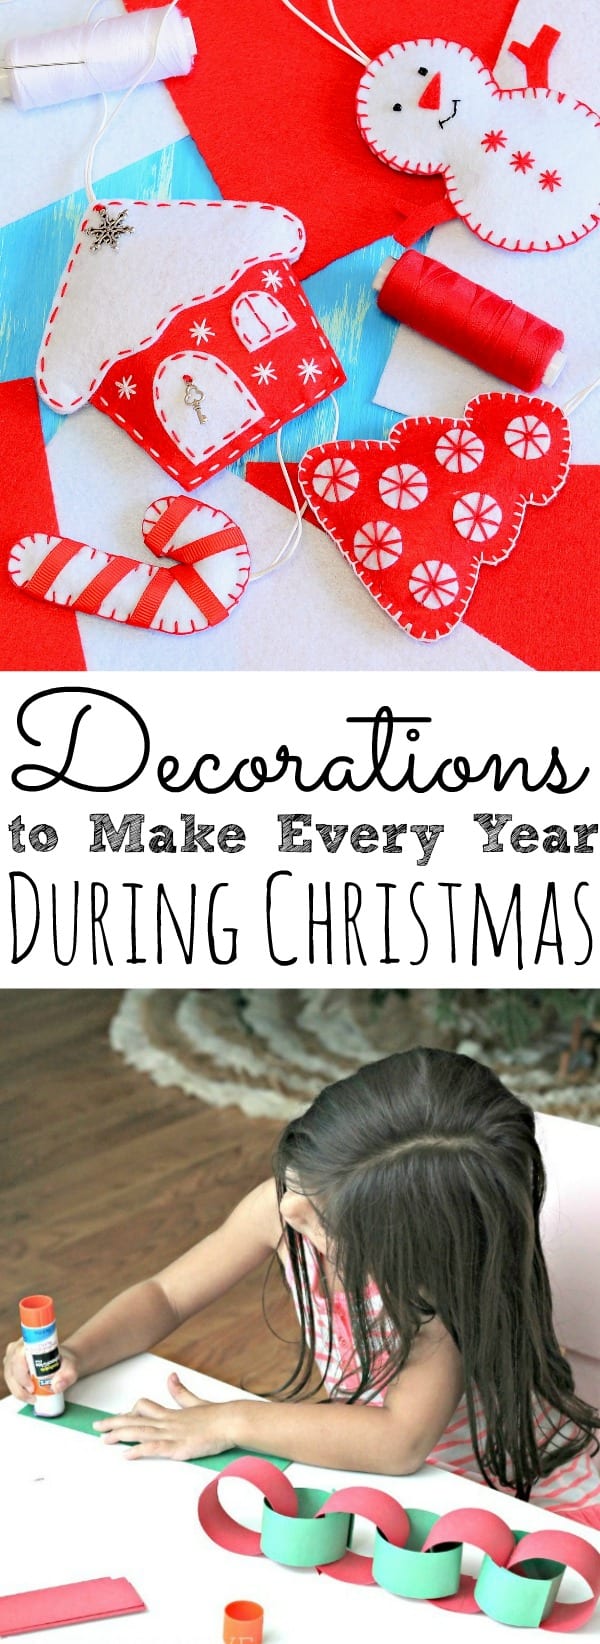 Decorations To Make Every Year During Christmas